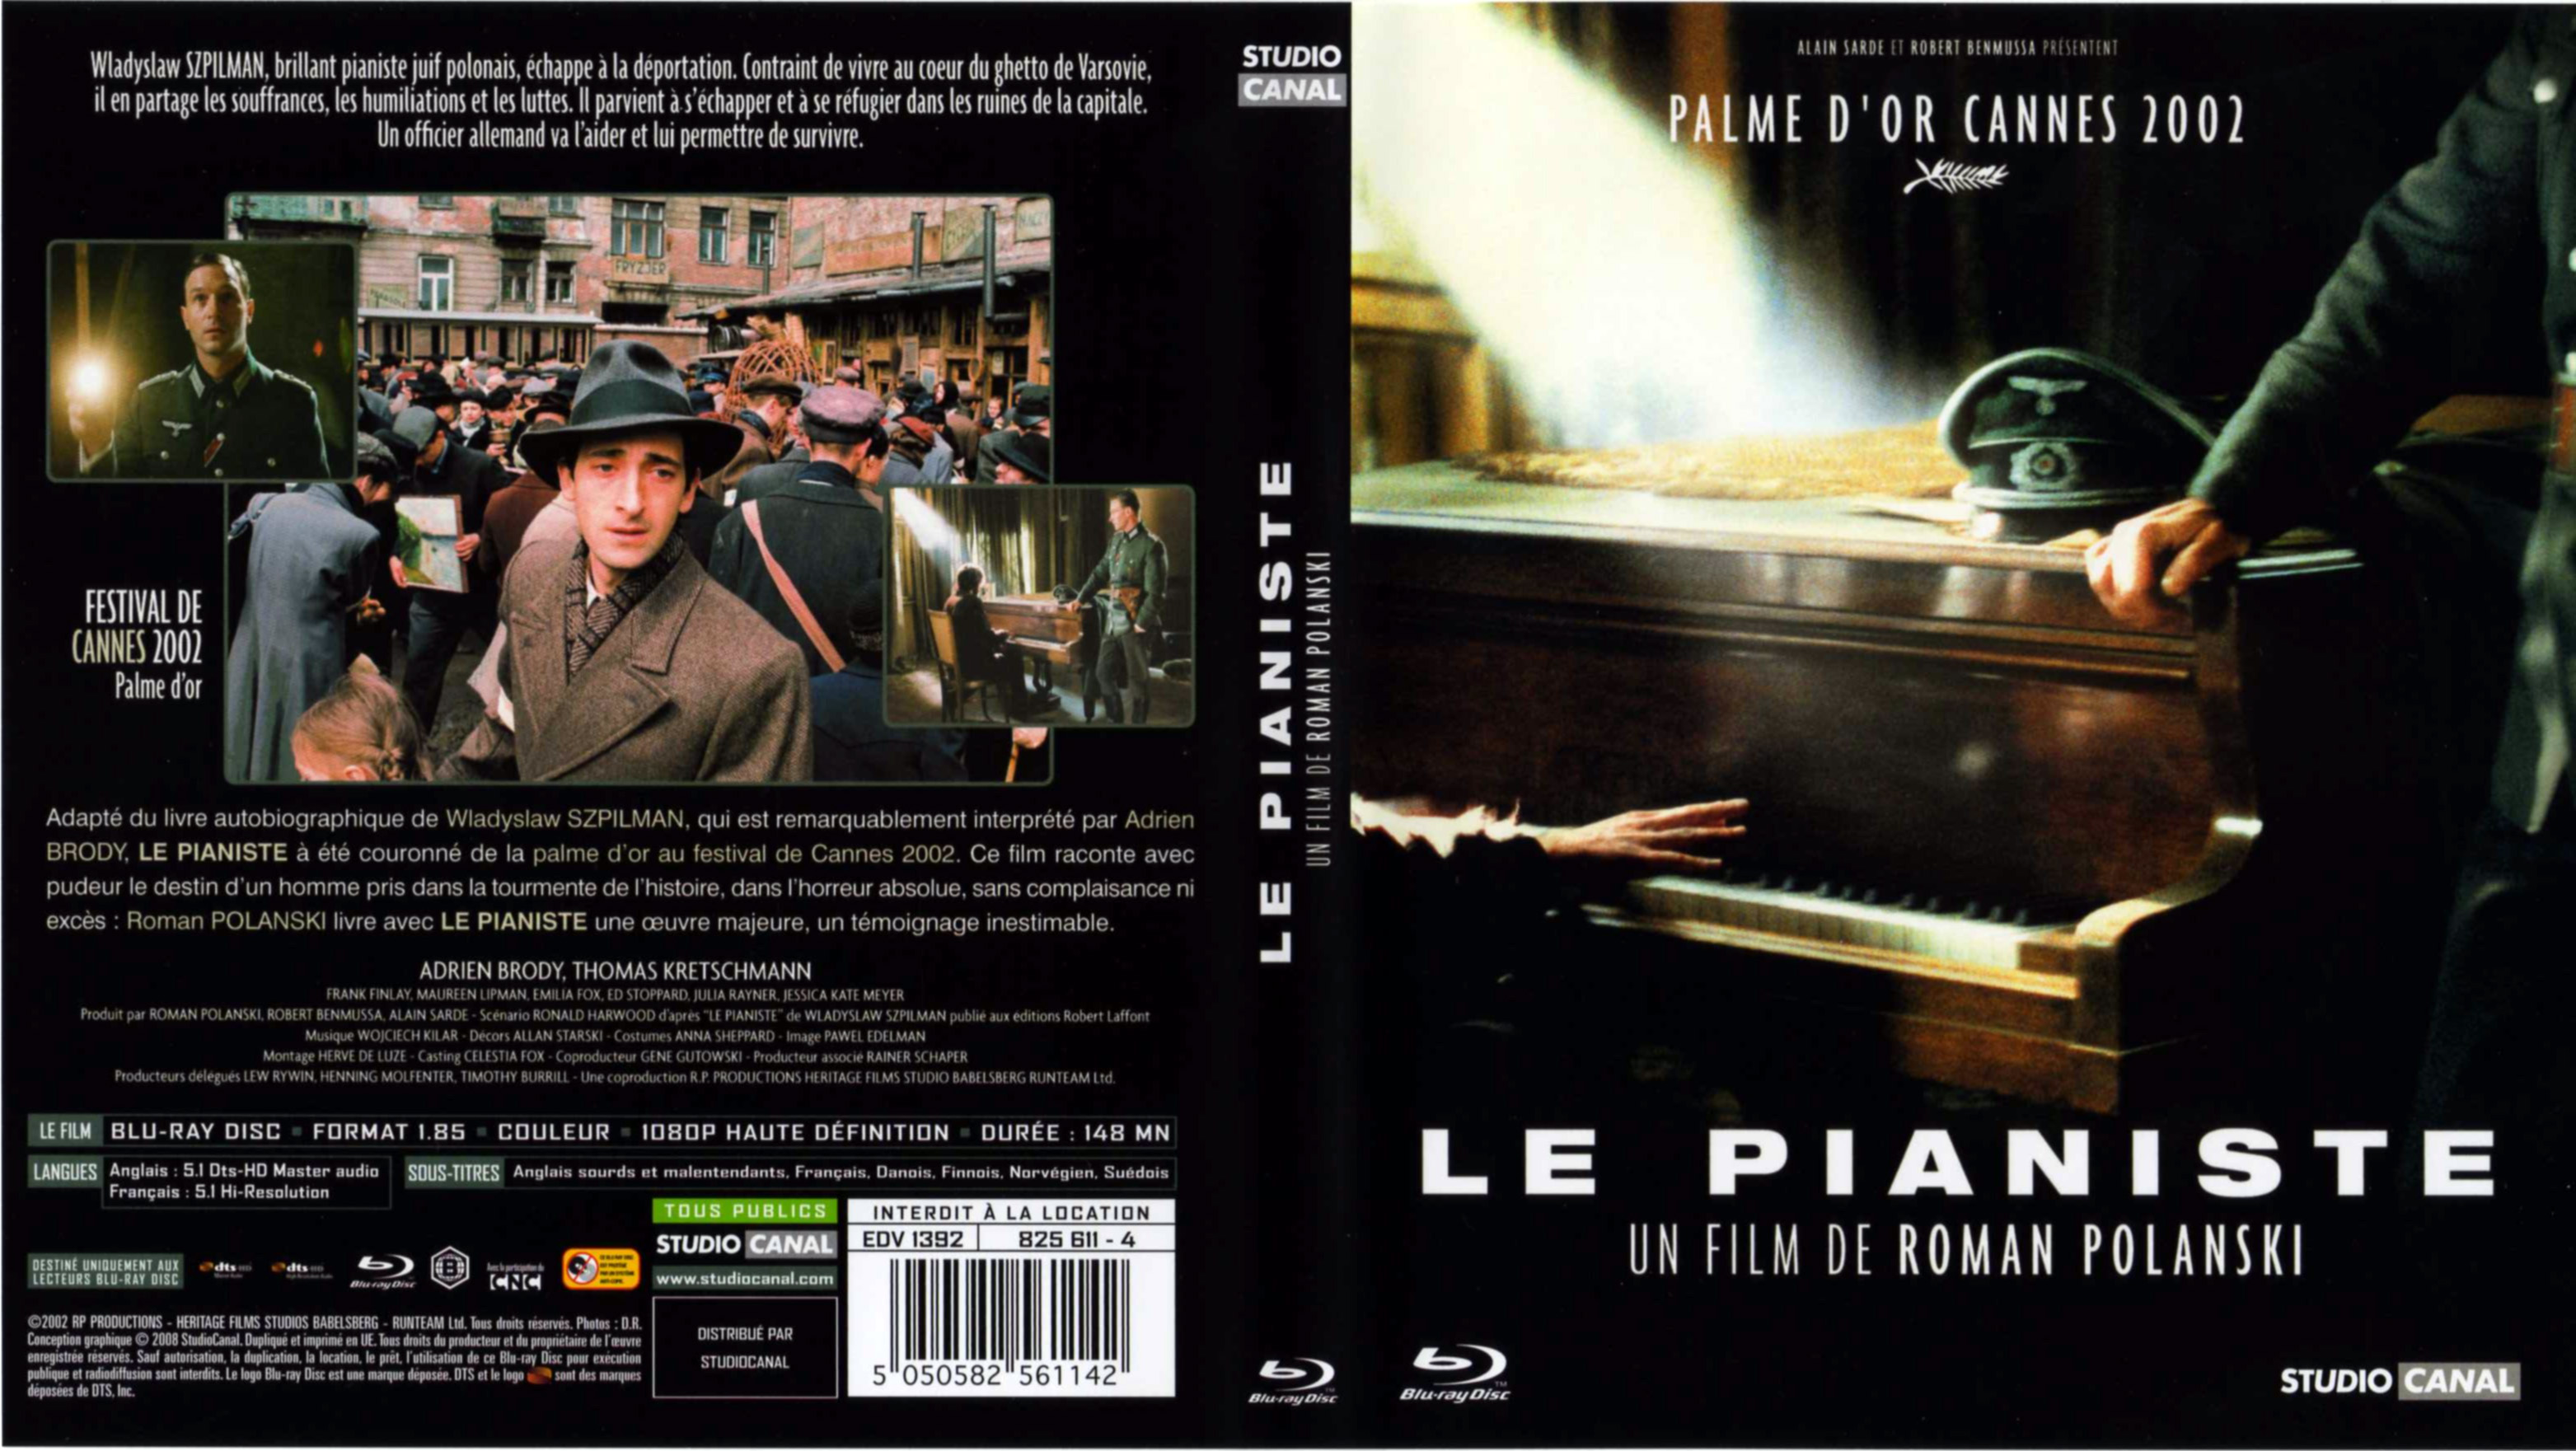 Jaquette DVD Le pianiste (BLU-RAY)